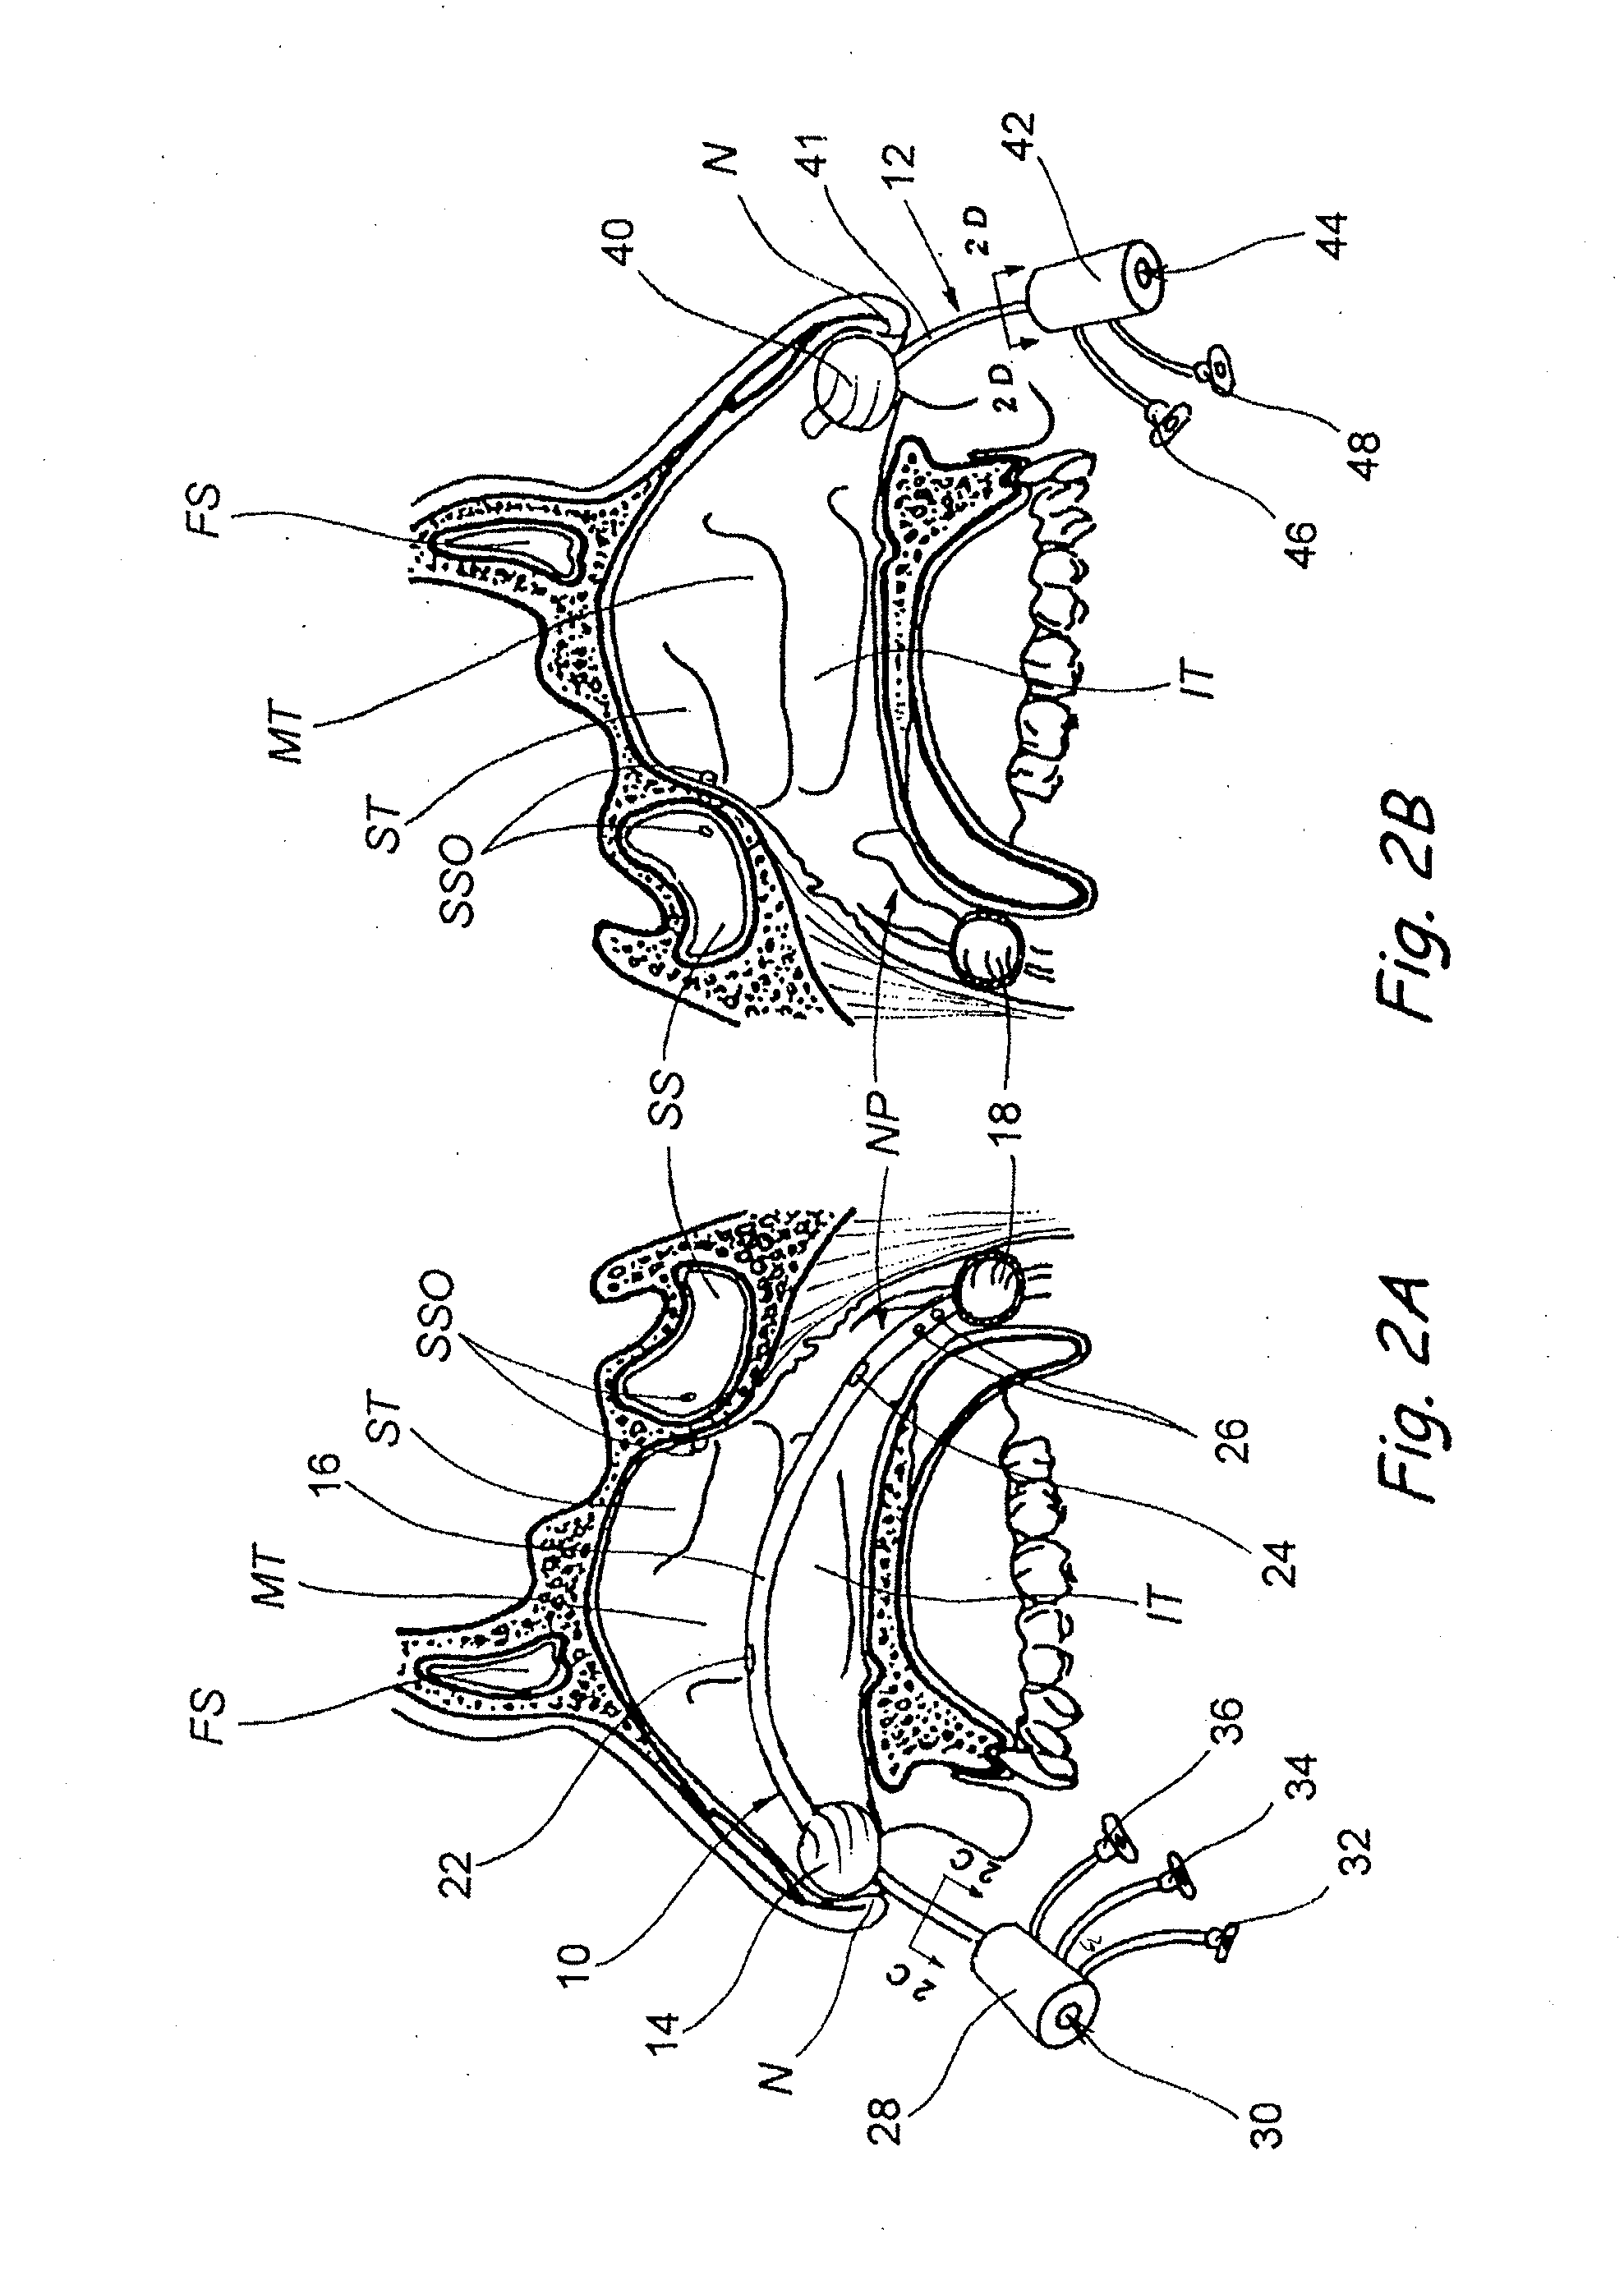 Devices, Systems and Methods For Diagnosing and Treating Sinusitis and Other Disorders of the Ears, Nose and/or Throat